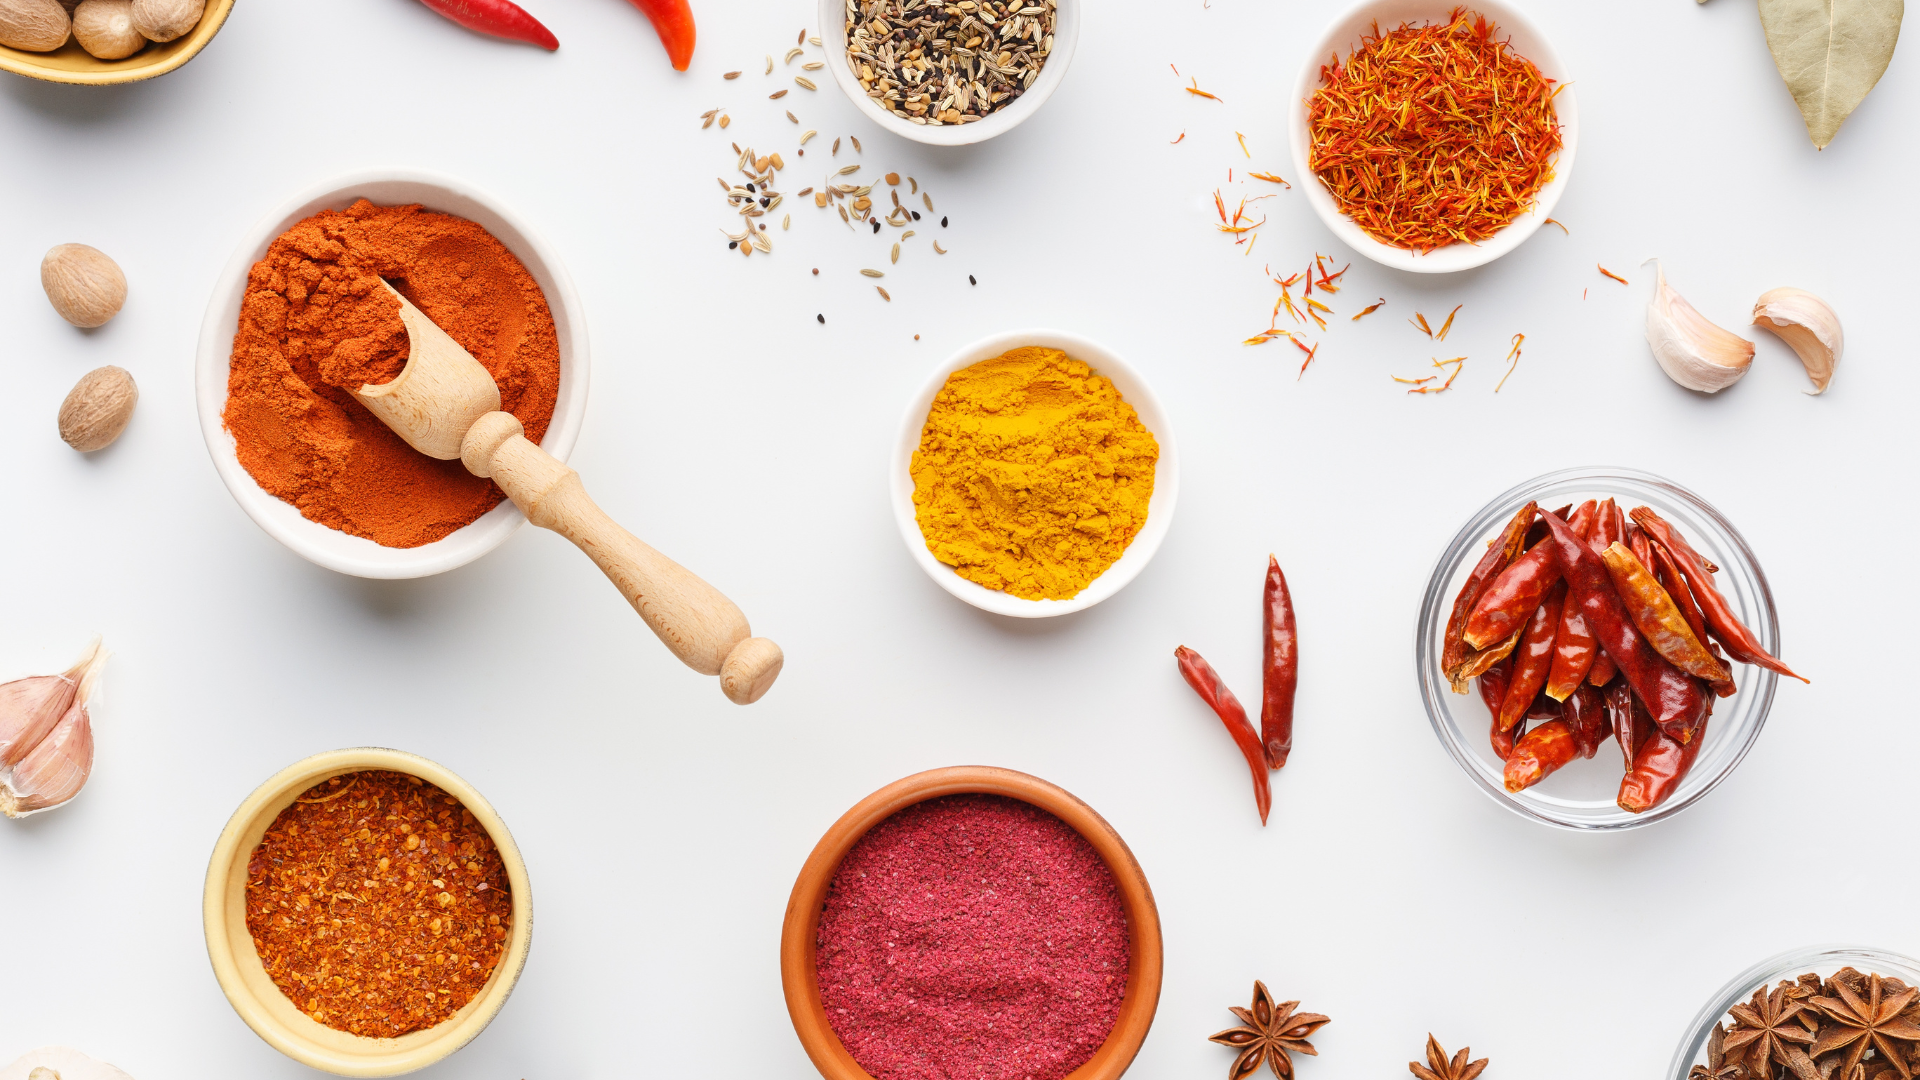 Flat lay image of spices in different bowls